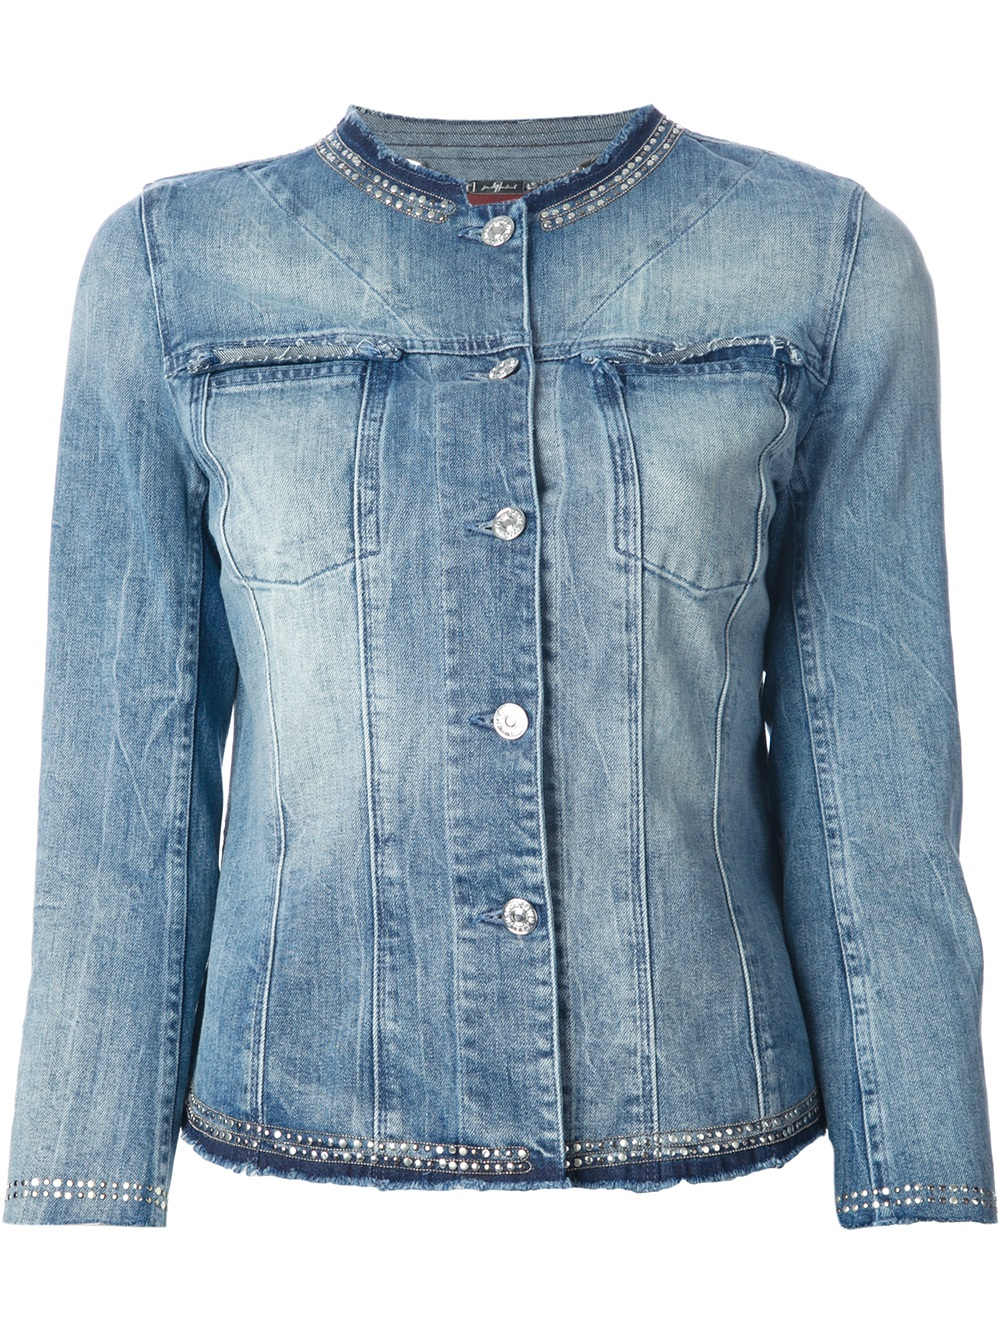 7 For All Mankind Collarless Denim Jacket in Blue - Lyst